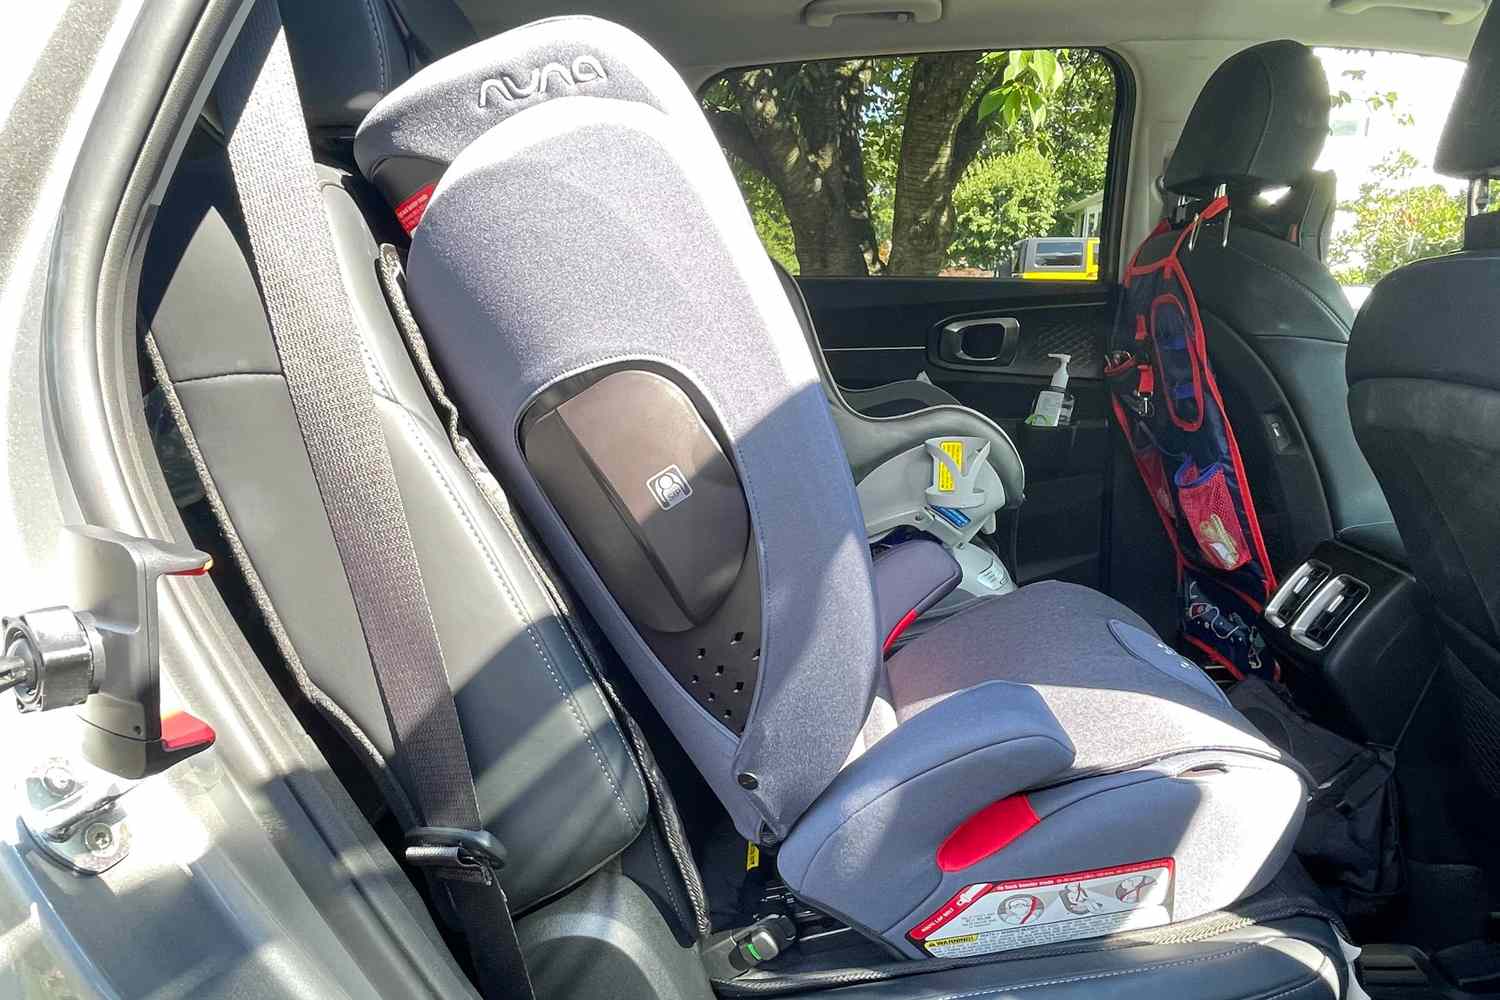 The Nuna AACE Booster Seat installed in the backseat of a car